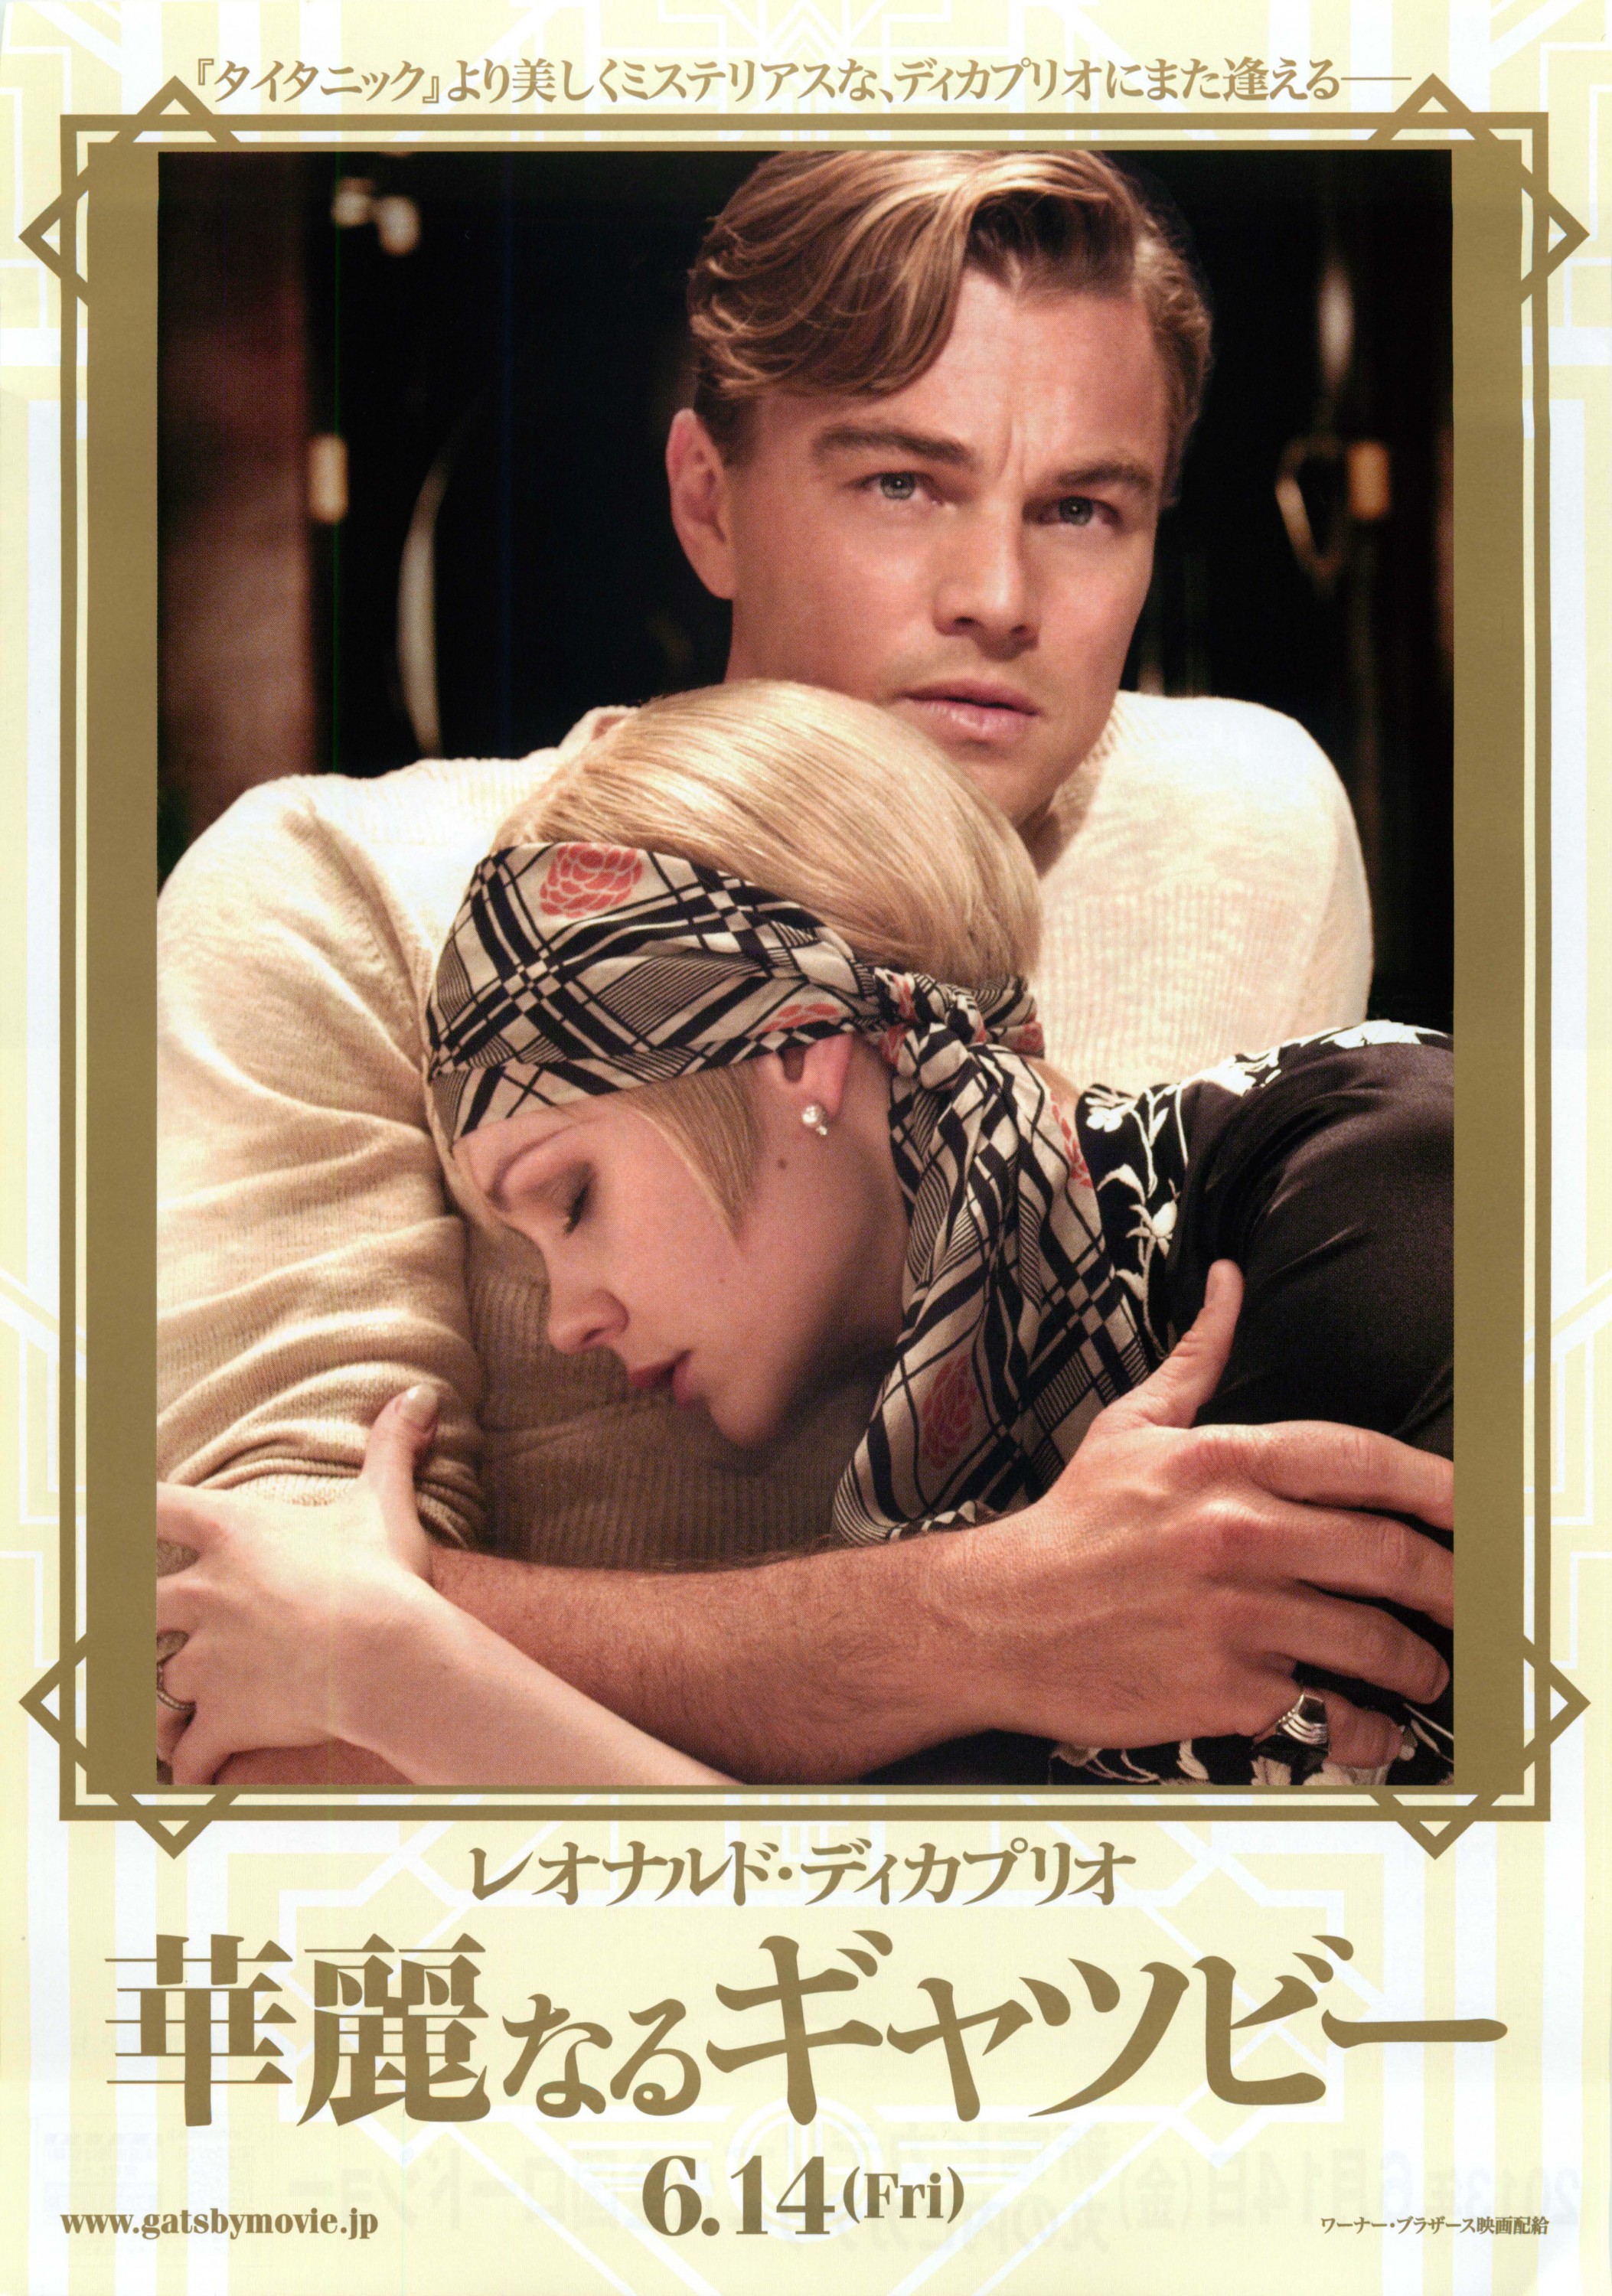 Mega Sized Movie Poster Image for The Great Gatsby (#8 of 24)